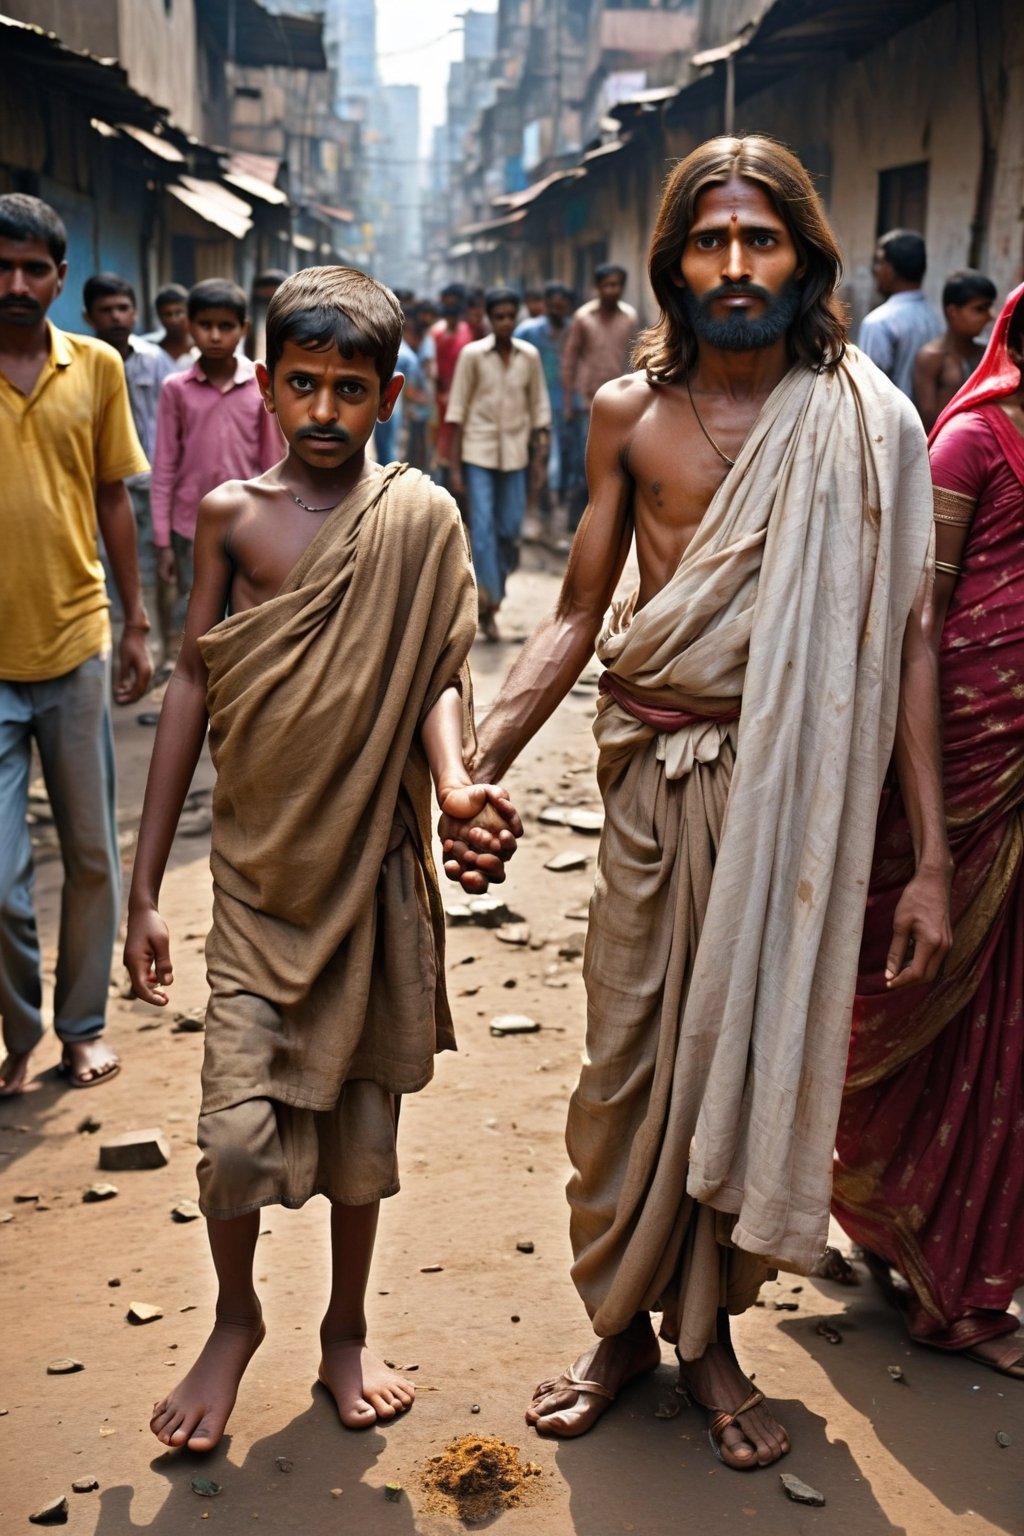 1 jesus and 1 india poor guy,
In particular, they show that the personality of Jesus is marked by both compassion and justice. Jesus felt love and expressed anger. His love was directed toward those who suffered. His anger was aimed at religious hypocrisy and hardness of heart. poverty and wealth, Maharashtra, India indian poor people stock pictures, royalty-free photos & images. Mumbai city, India. Mumbai cityscape with a big ...Free Kid Slum photo and picture. kid slum poverty poor · Free Poor Family Indian Family vector and picture · poor family · Free Indian Vegetables photo and ...